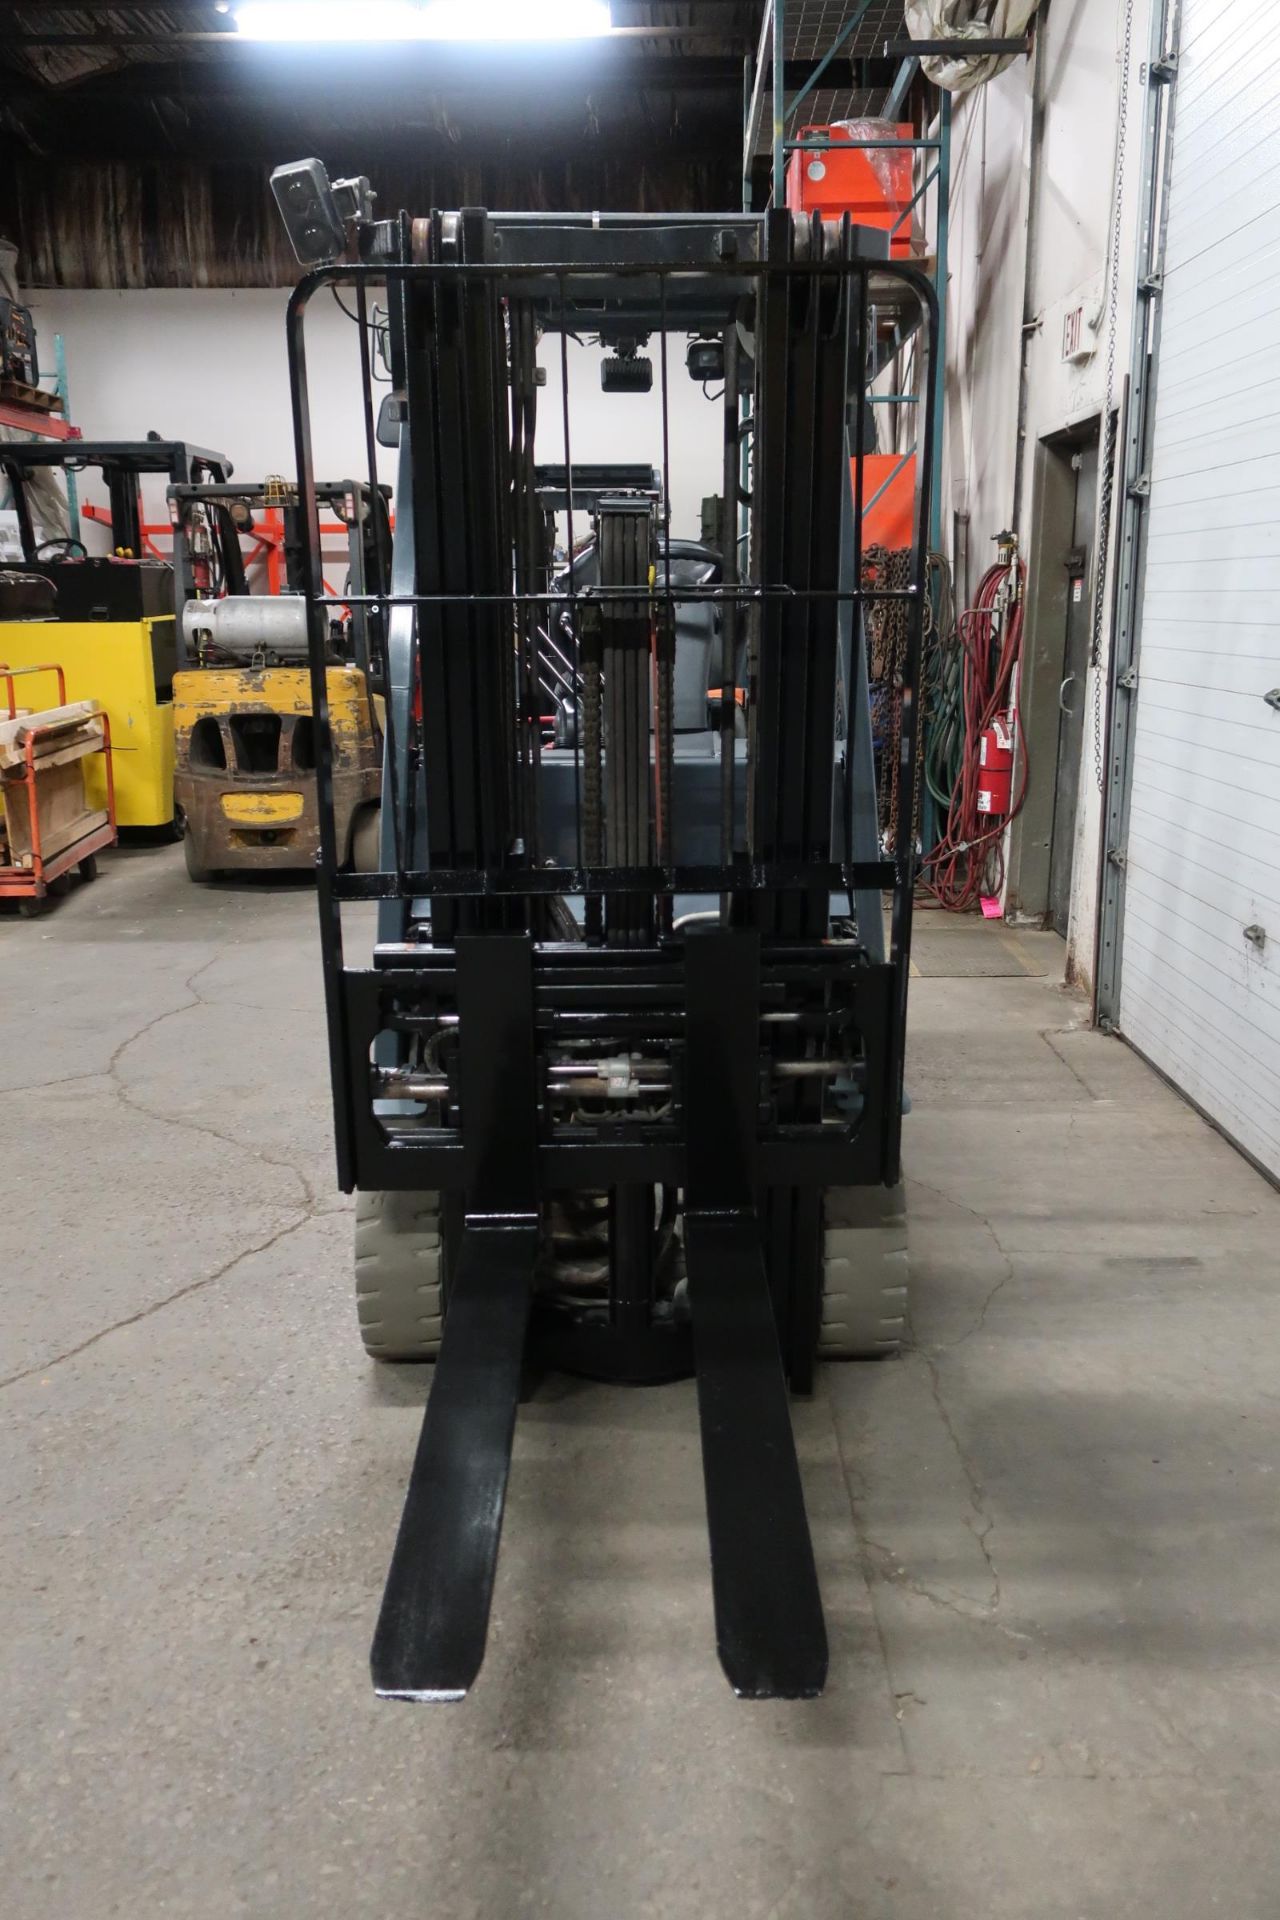 FREE CUSTOMS - 2014 Toyota 5000lbs Capacity Electric Forklift with sideshift and fork positioner and - Image 2 of 2